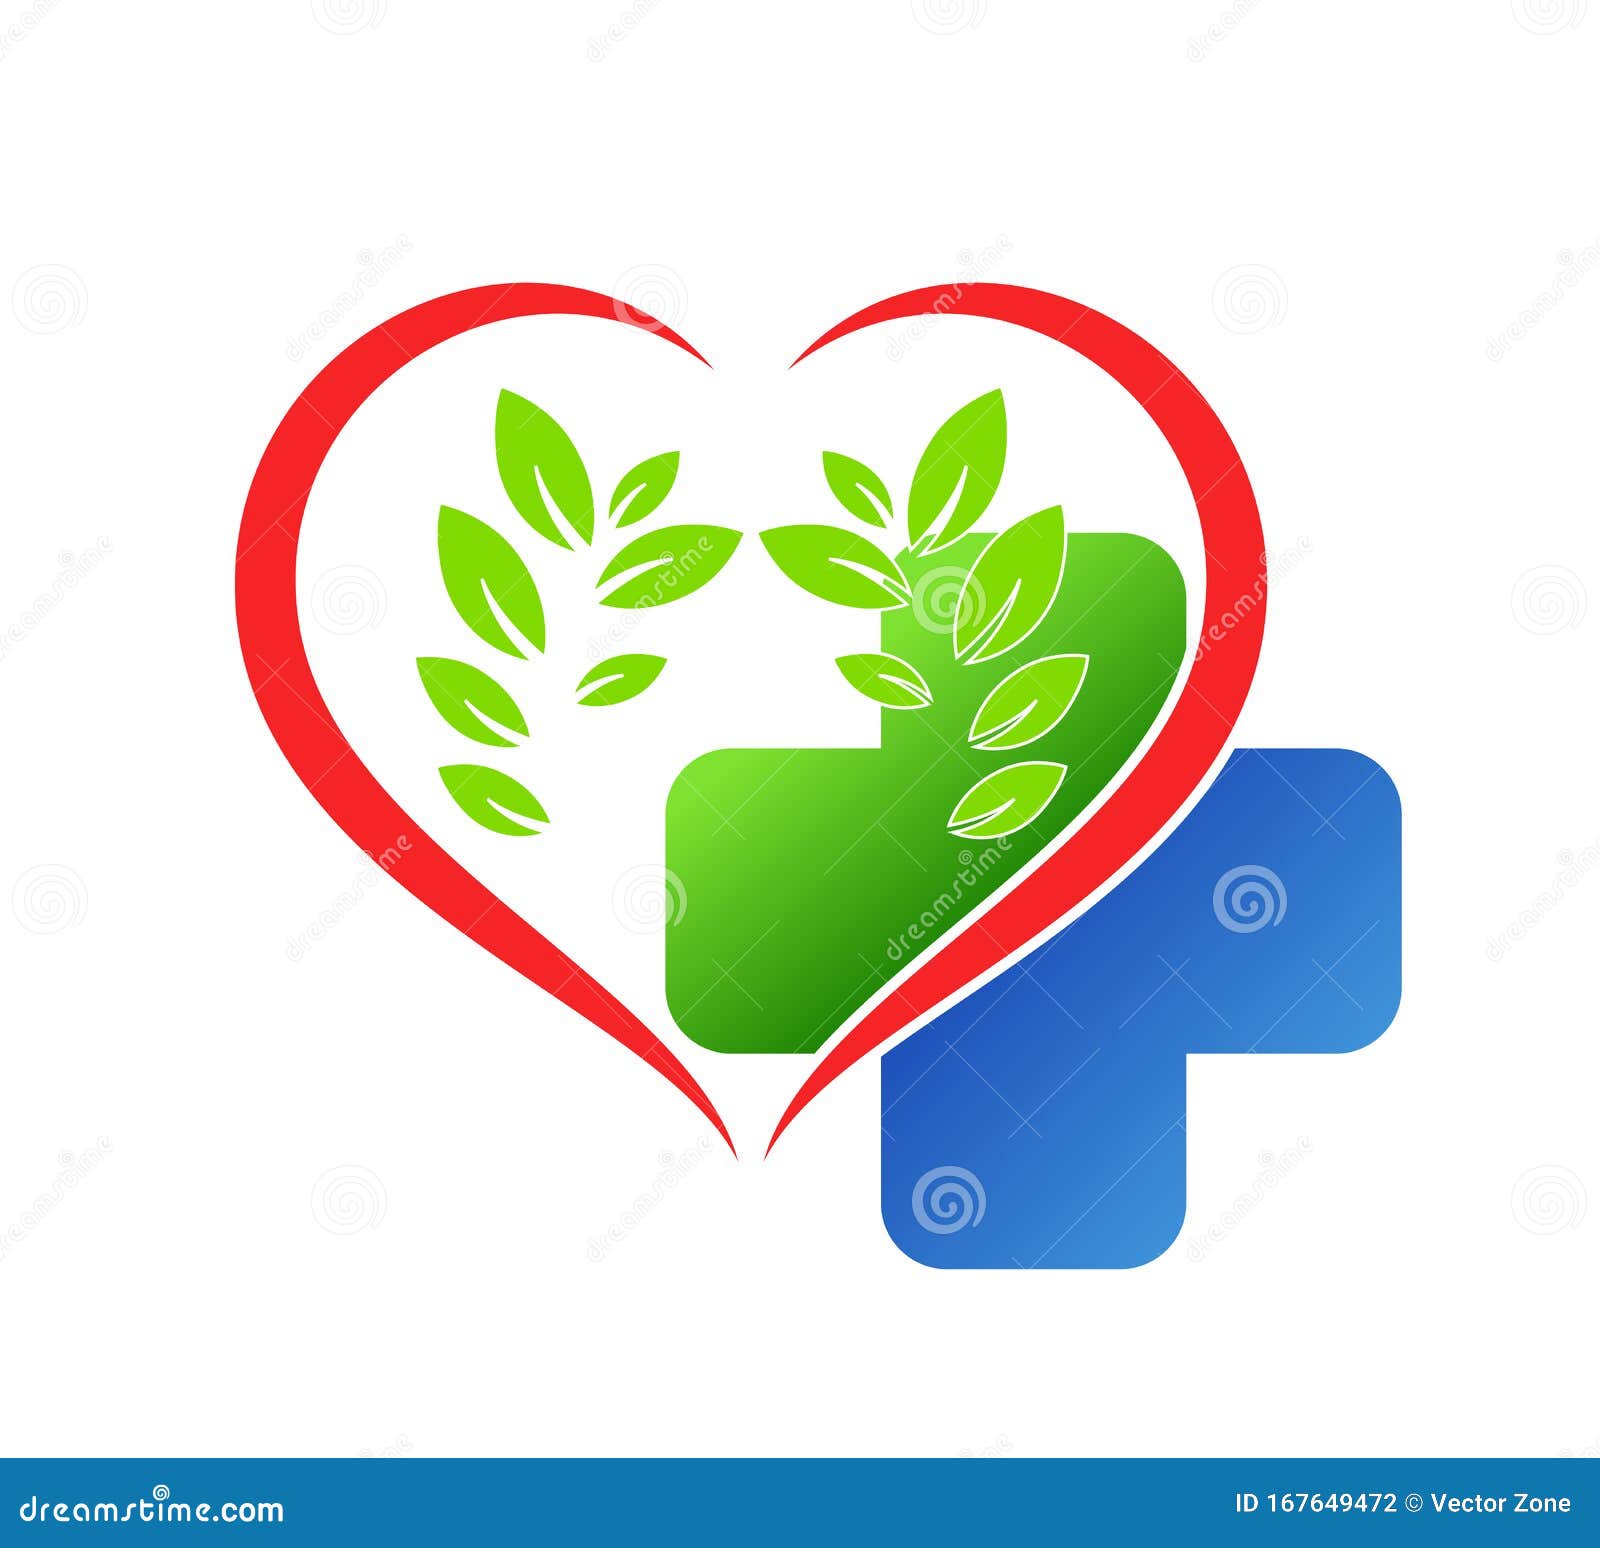 Premium Vector - Heart health icon with green leafheart surgery clinic,  cardiology center or cardiologist doctor practice, medical program vector  emblem, label or icon with red heart silhouette and leaves